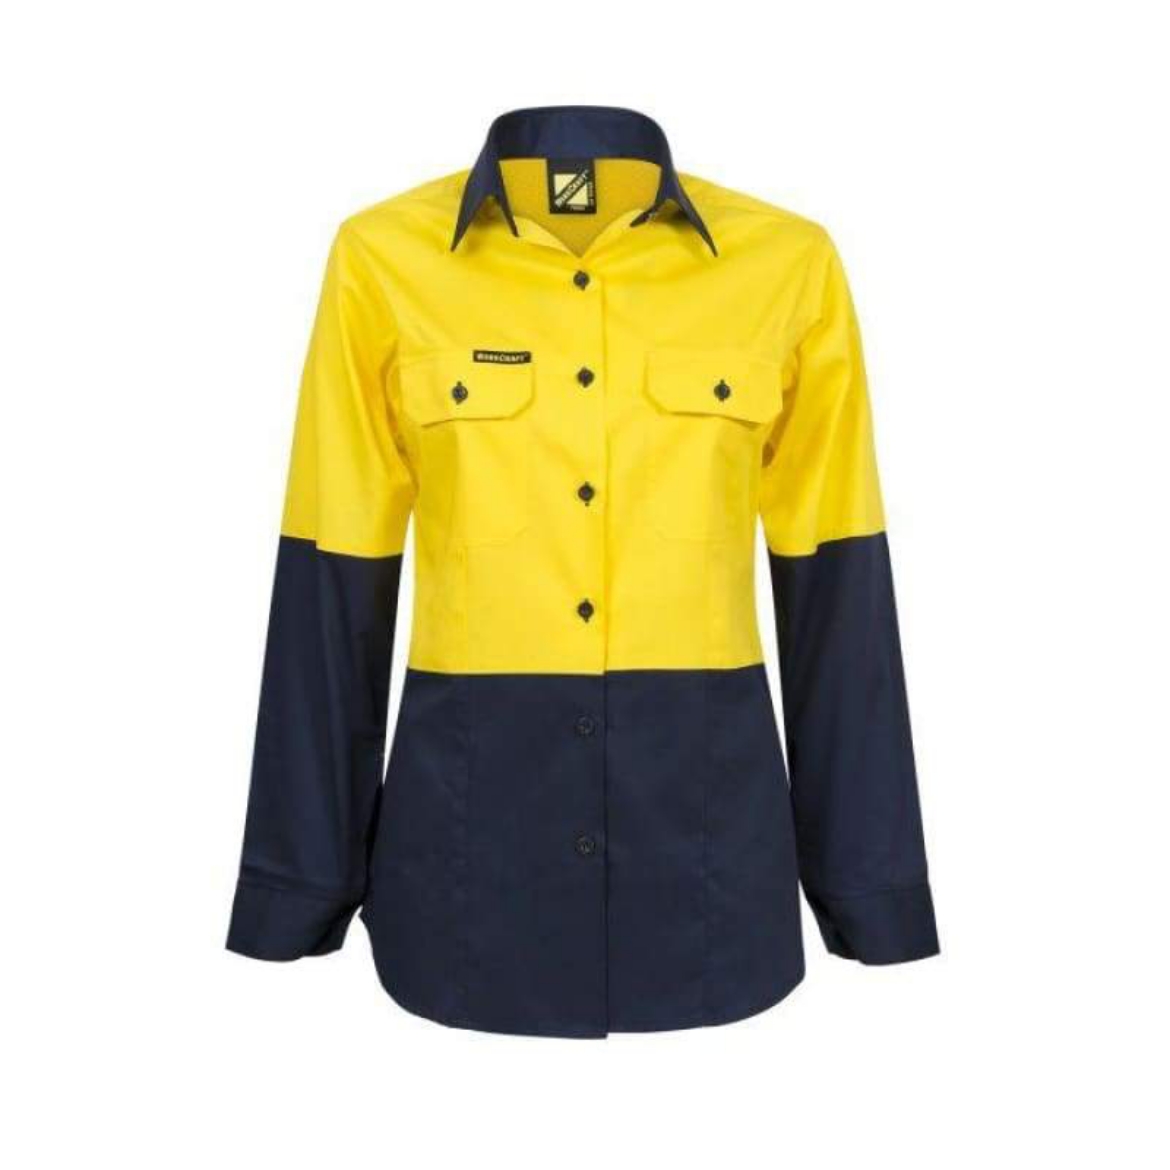 Picture of WorkCraft, Womens, Shirt, Long Sleeve, Lightweight, Hi Vis, Two Tone, Vented, Cotton Drill